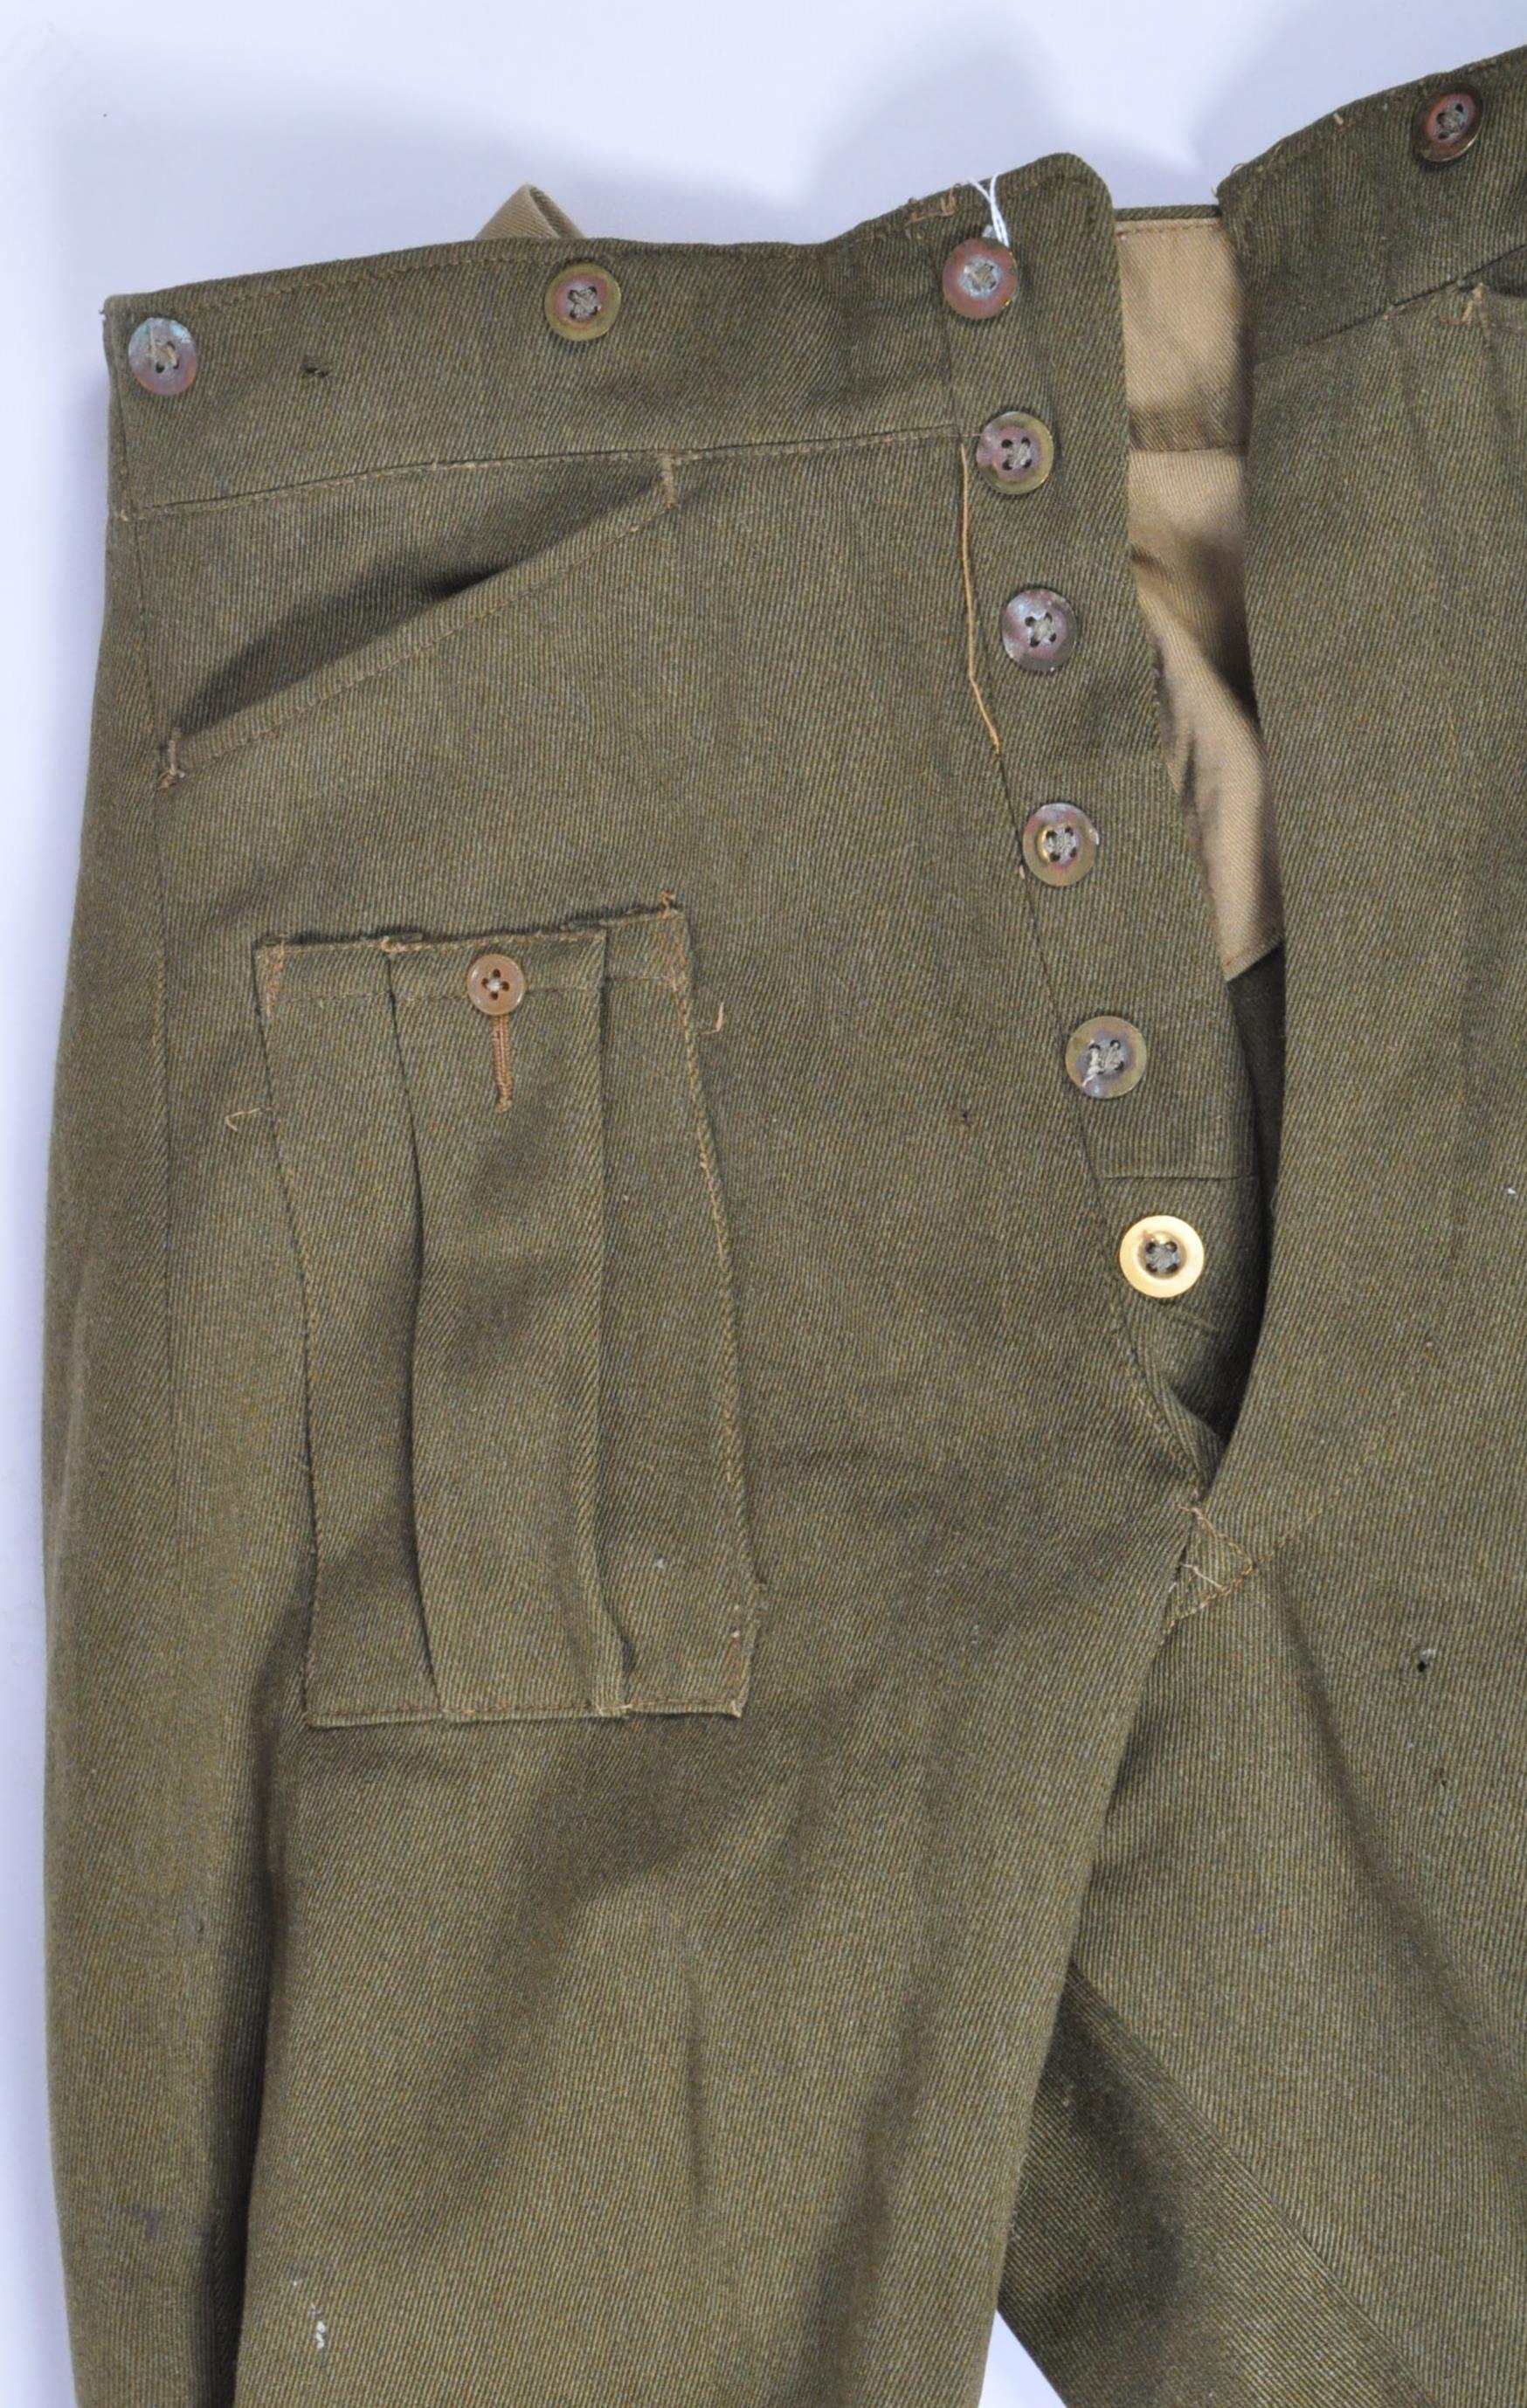 WWII SECOND WORLD WAR BRITISH ARMY UNIFORM BREECHES / TROUSERS - Image 4 of 6